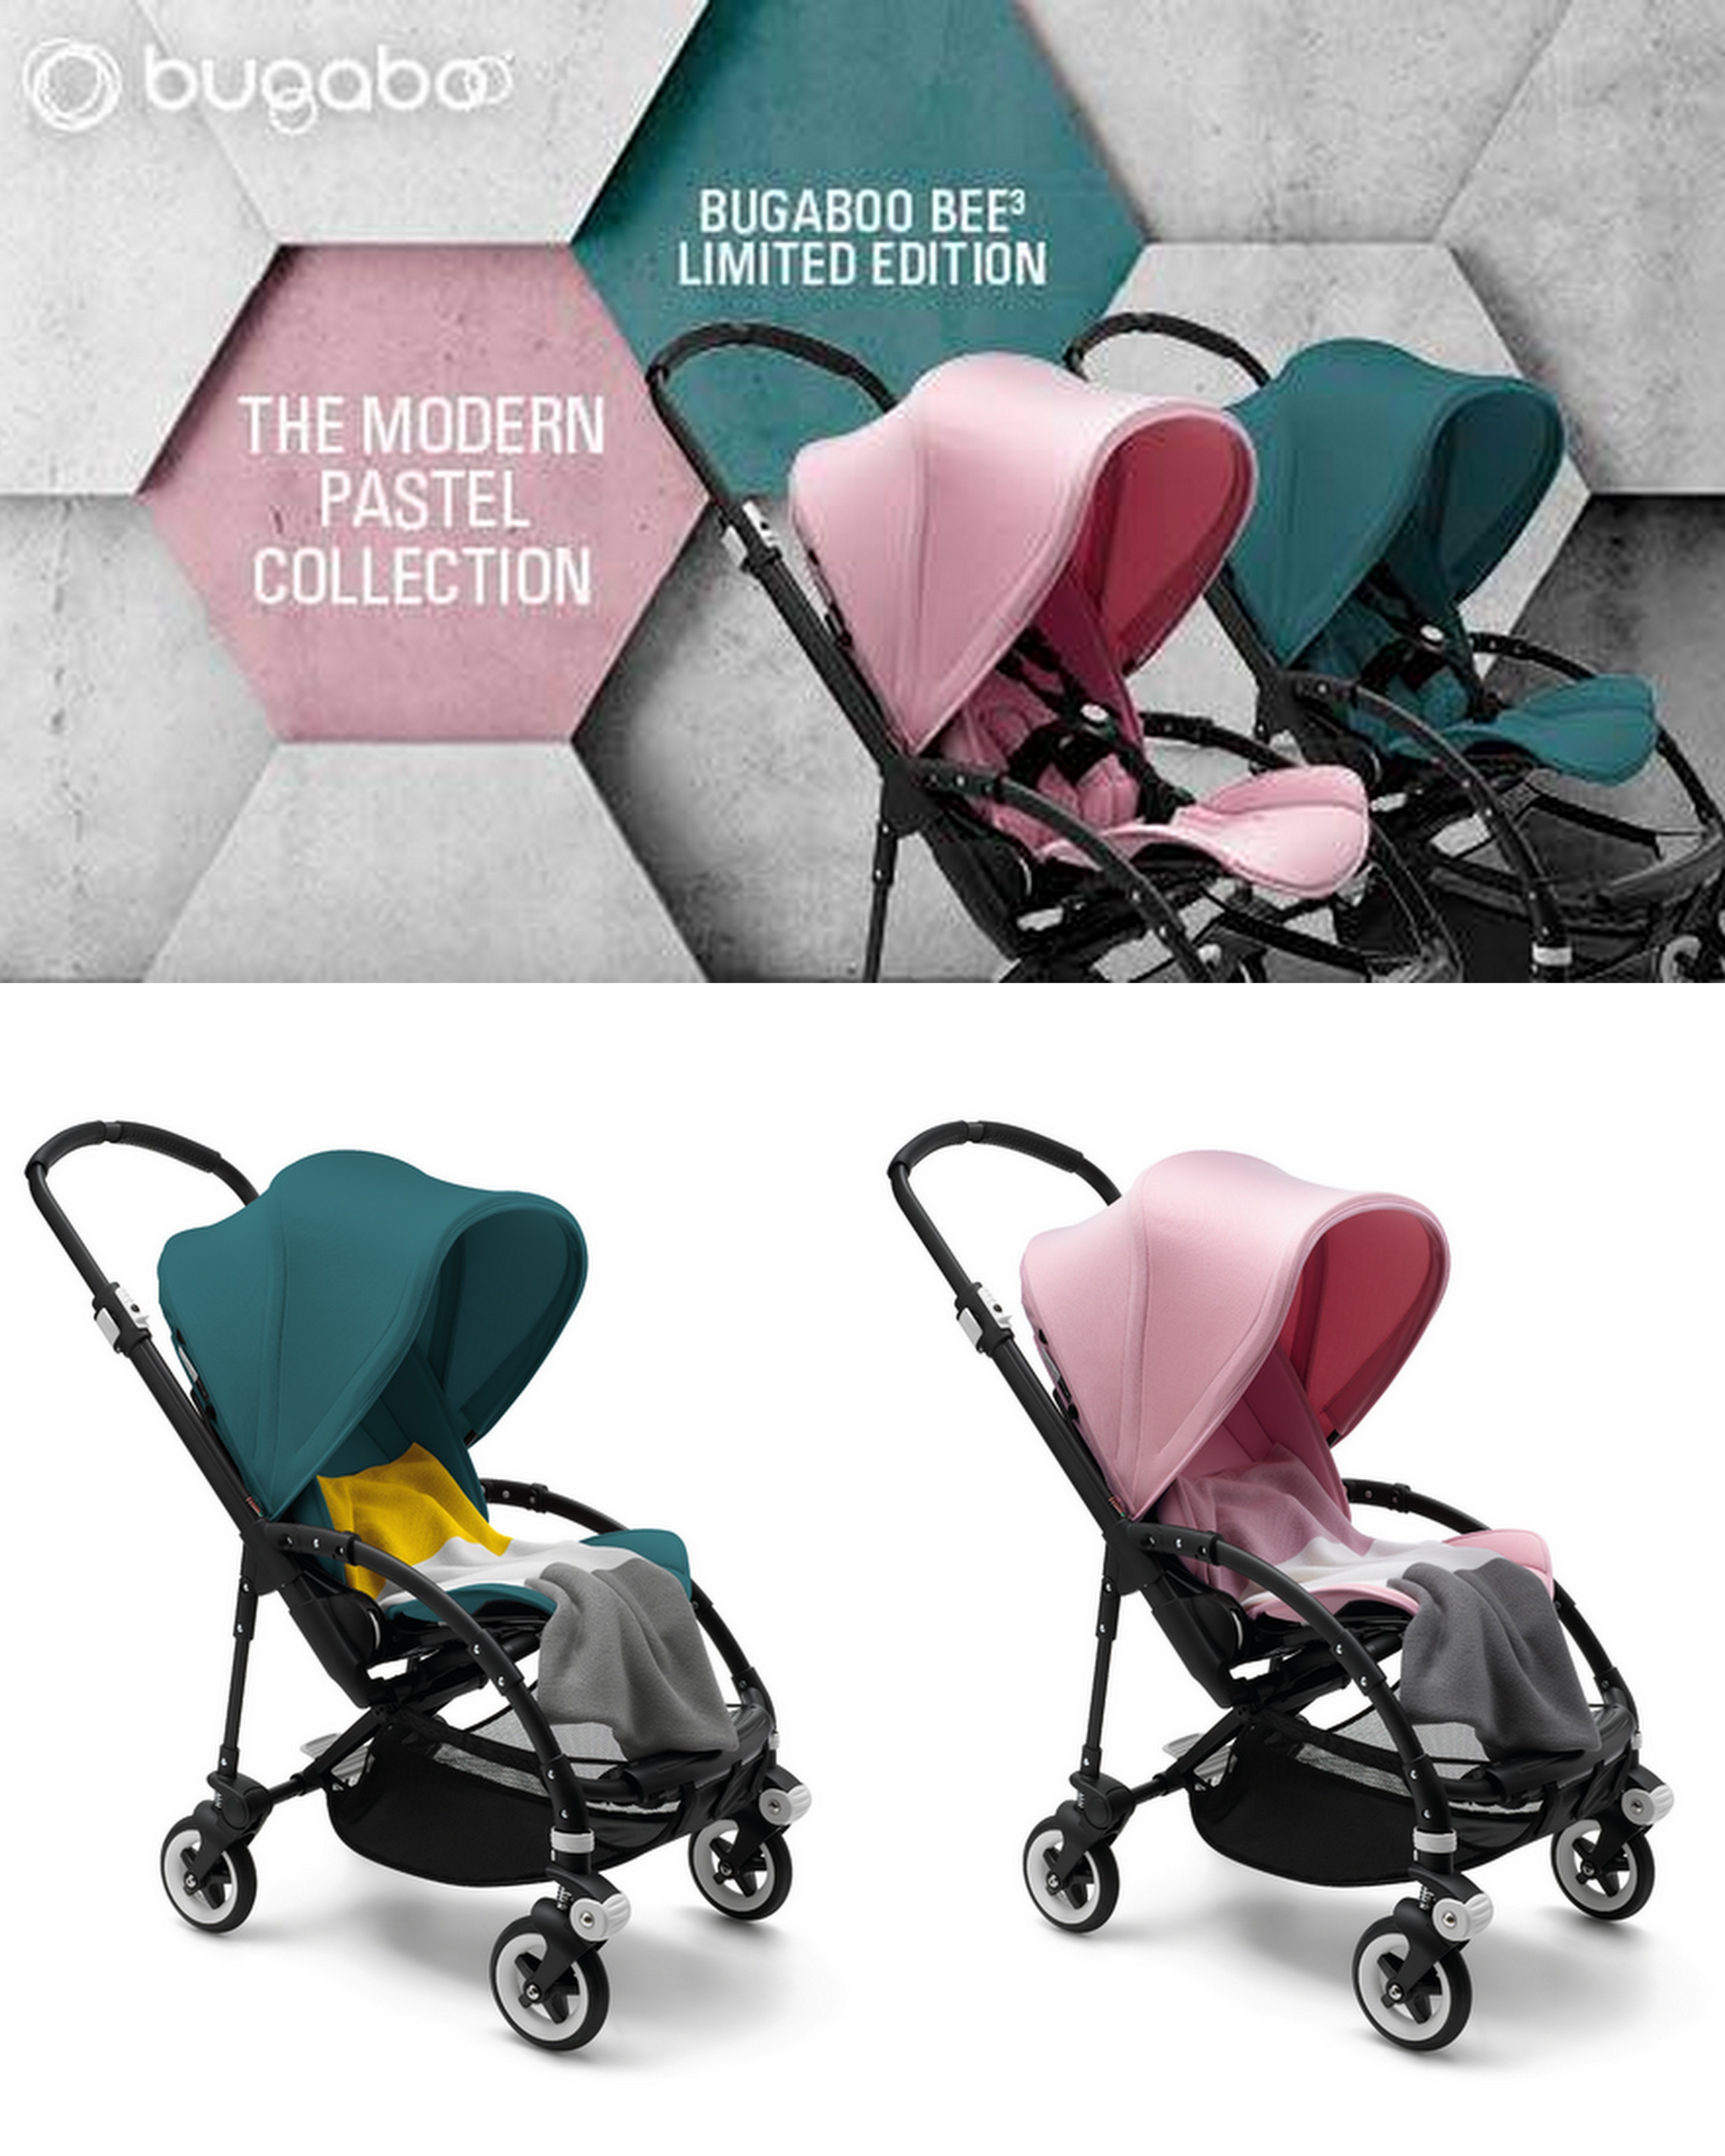 Bugaboo-Bee-Modern-Pastel-Collection